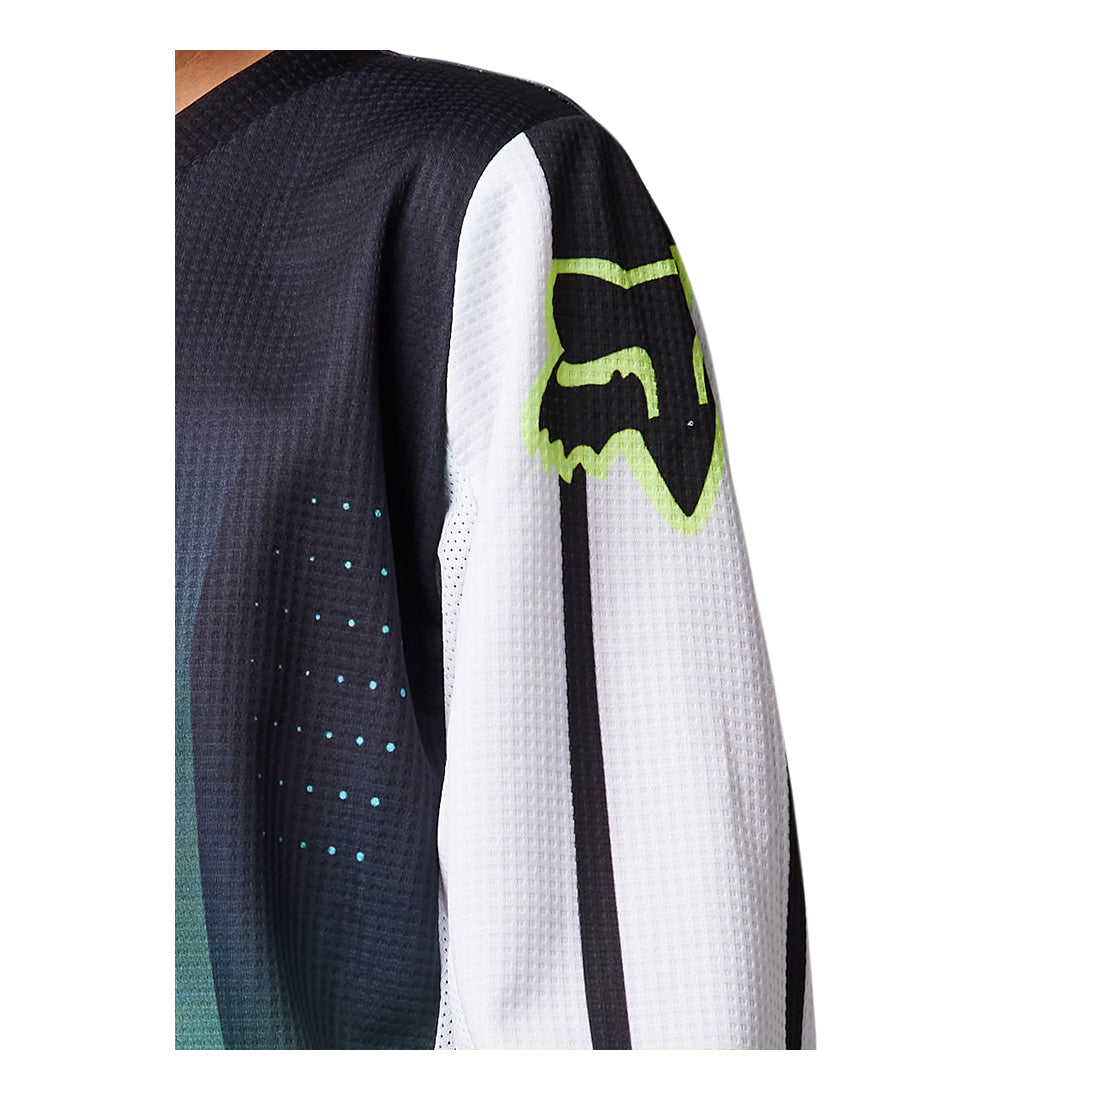 Youth 180 Leed Jersey - Fox Racing South Africa